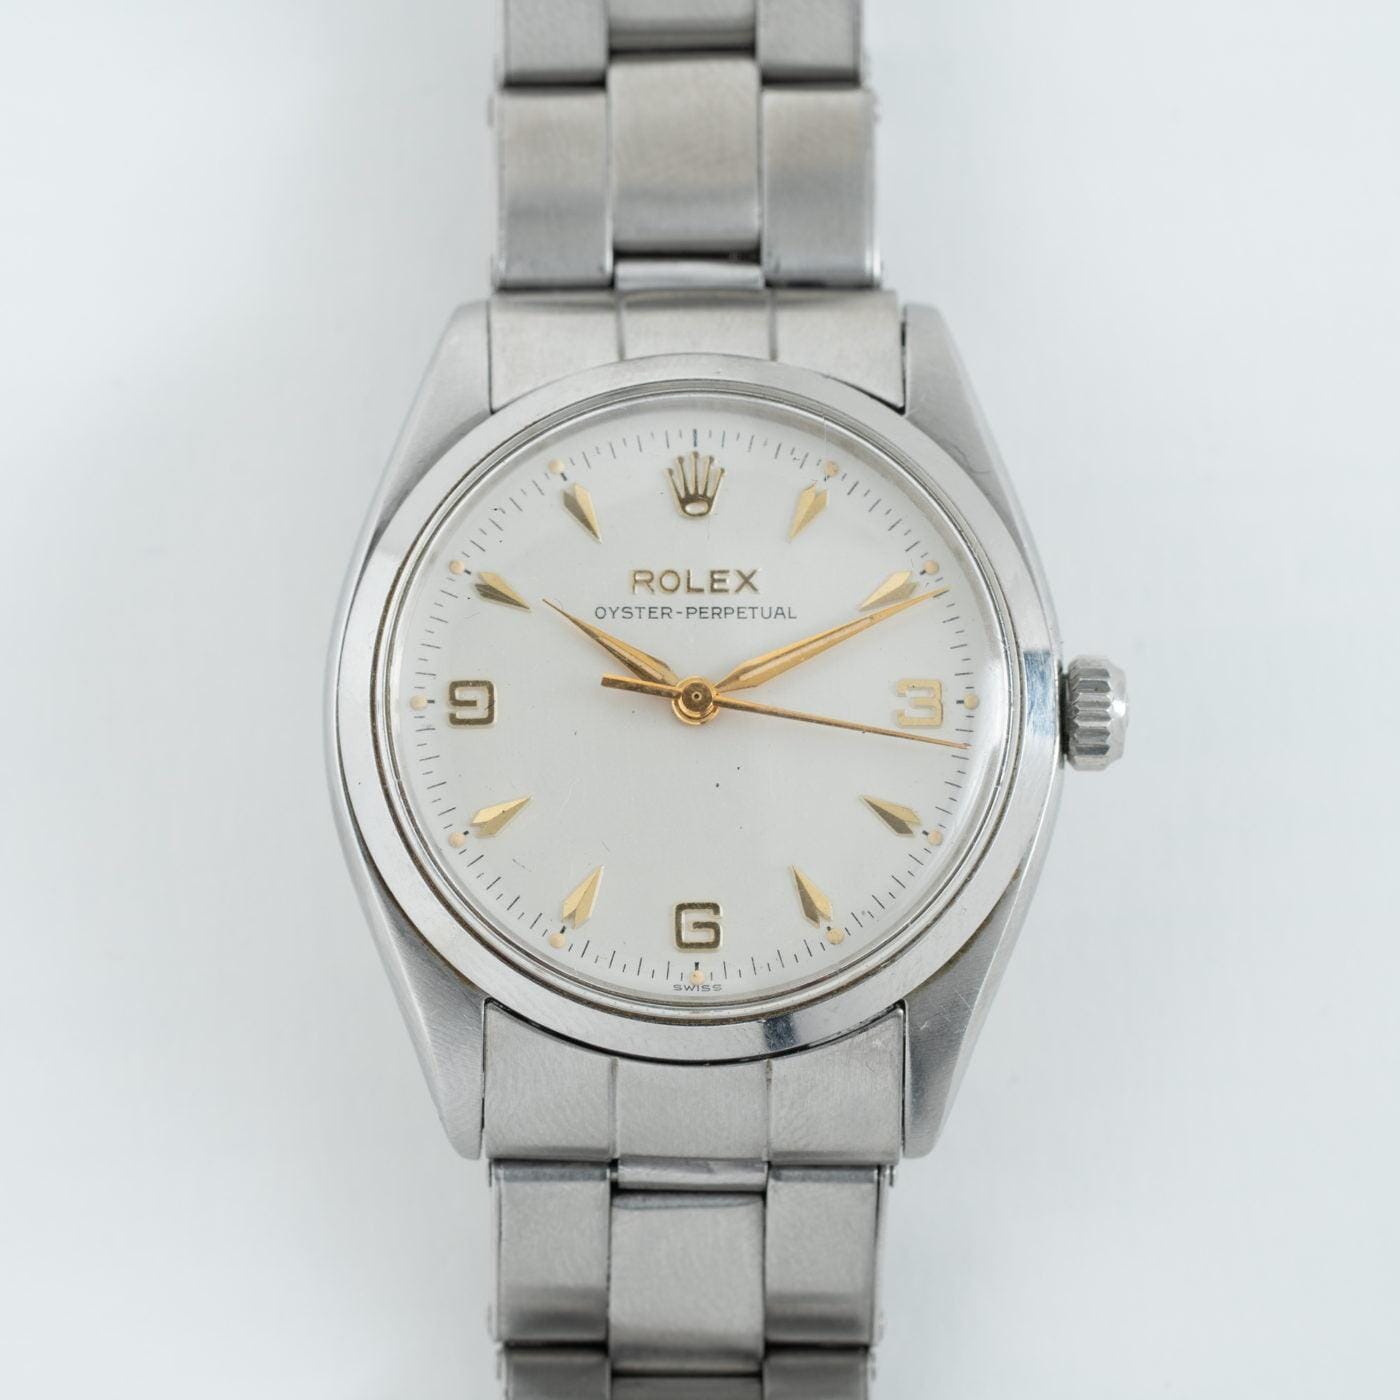 ROLEX Oyster Perpetual 6564 Ivory Dial 1950s - Arbitro